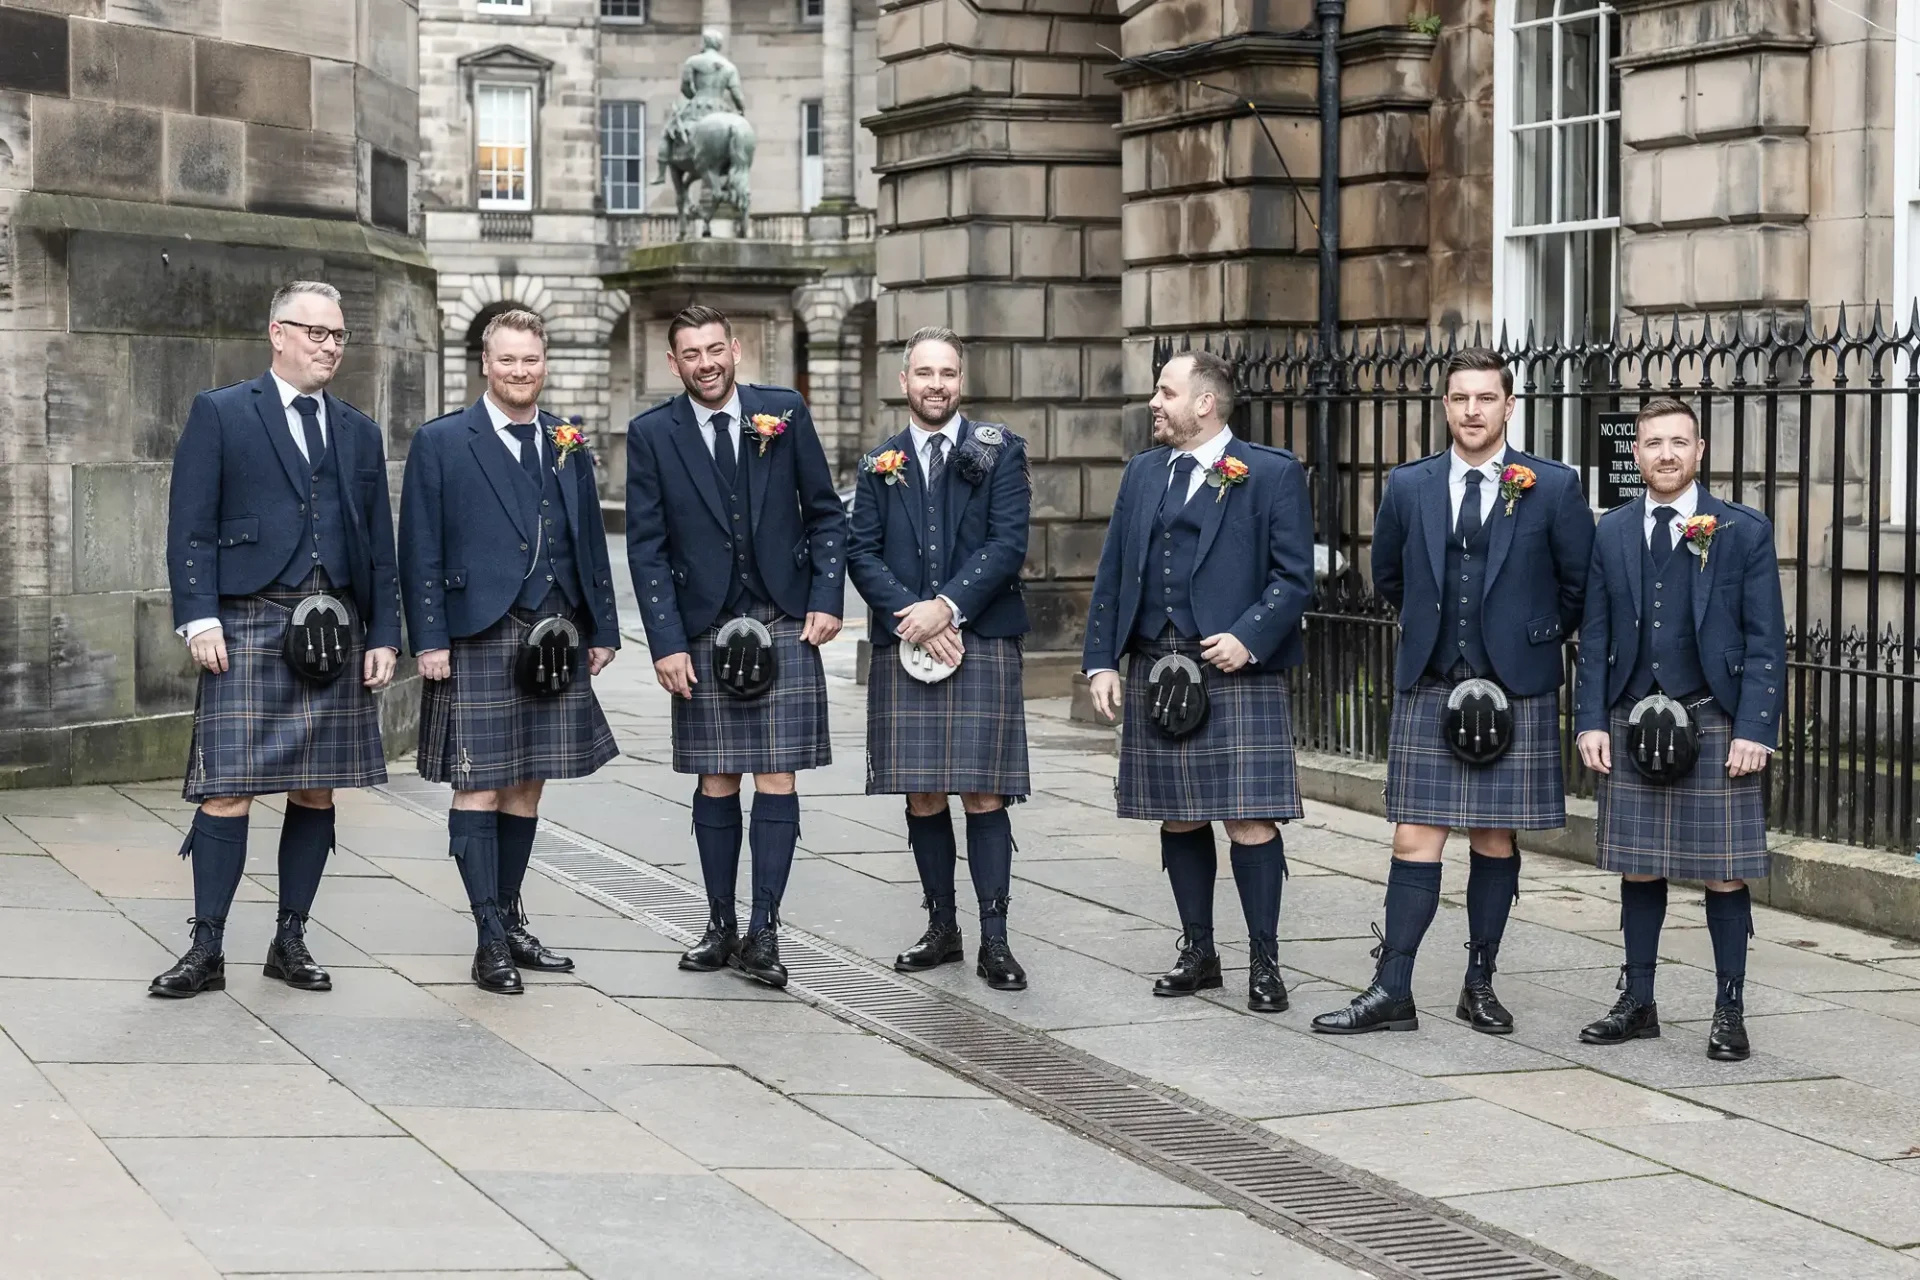 Seven men in matching tartan kilts and jackets smiling and holding their hats, standing on a cobblestone street.